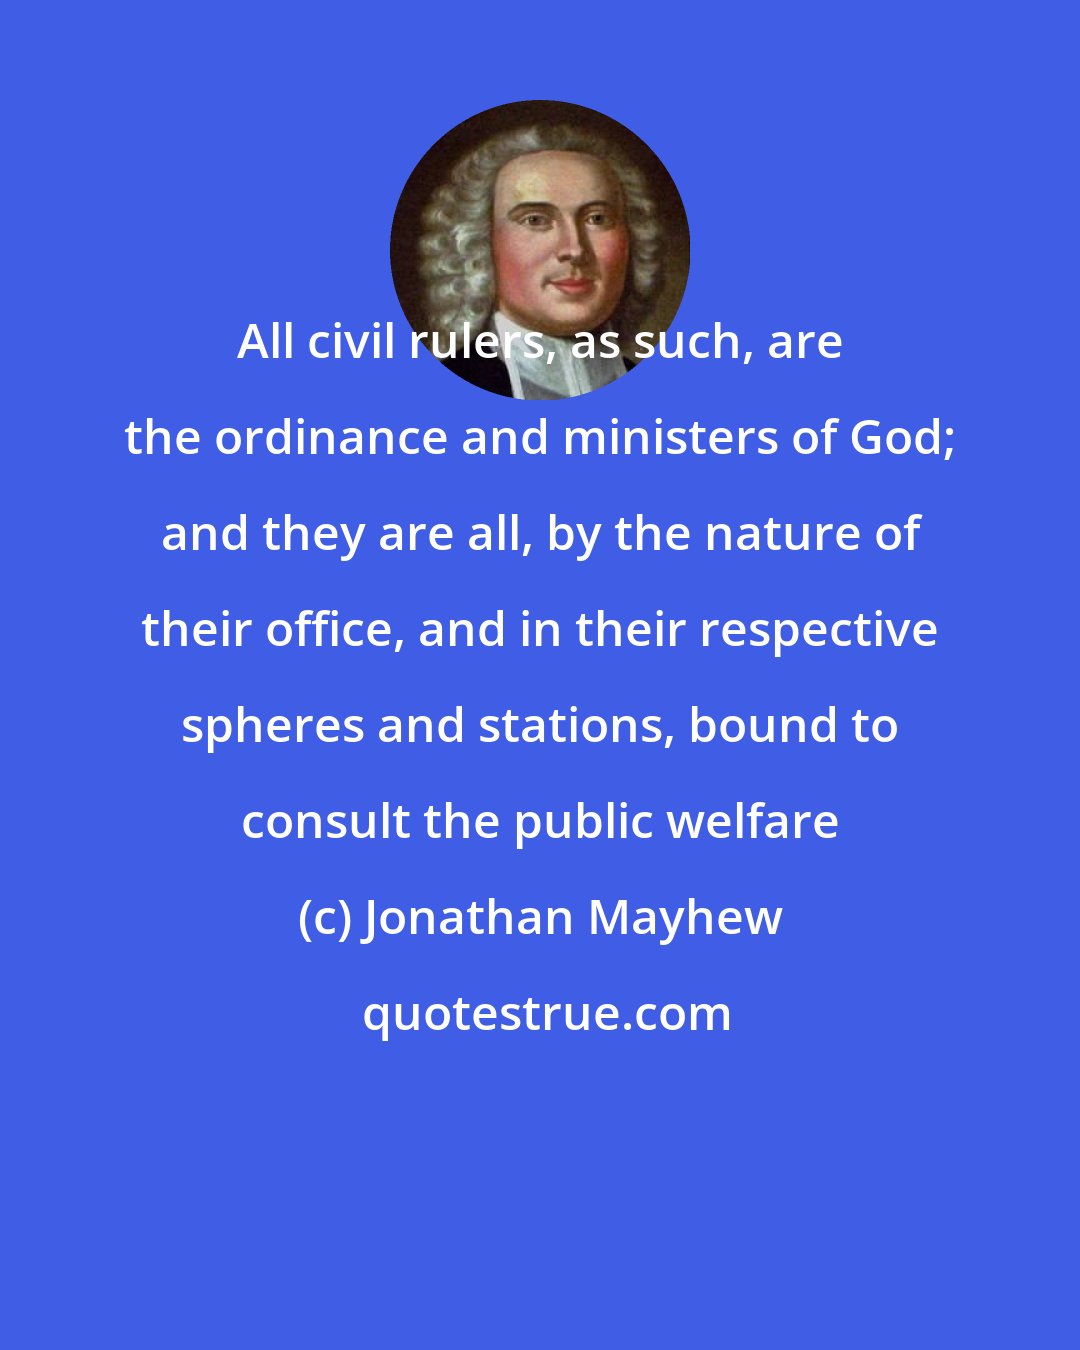 Jonathan Mayhew: All civil rulers, as such, are the ordinance and ministers of God; and they are all, by the nature of their office, and in their respective spheres and stations, bound to consult the public welfare